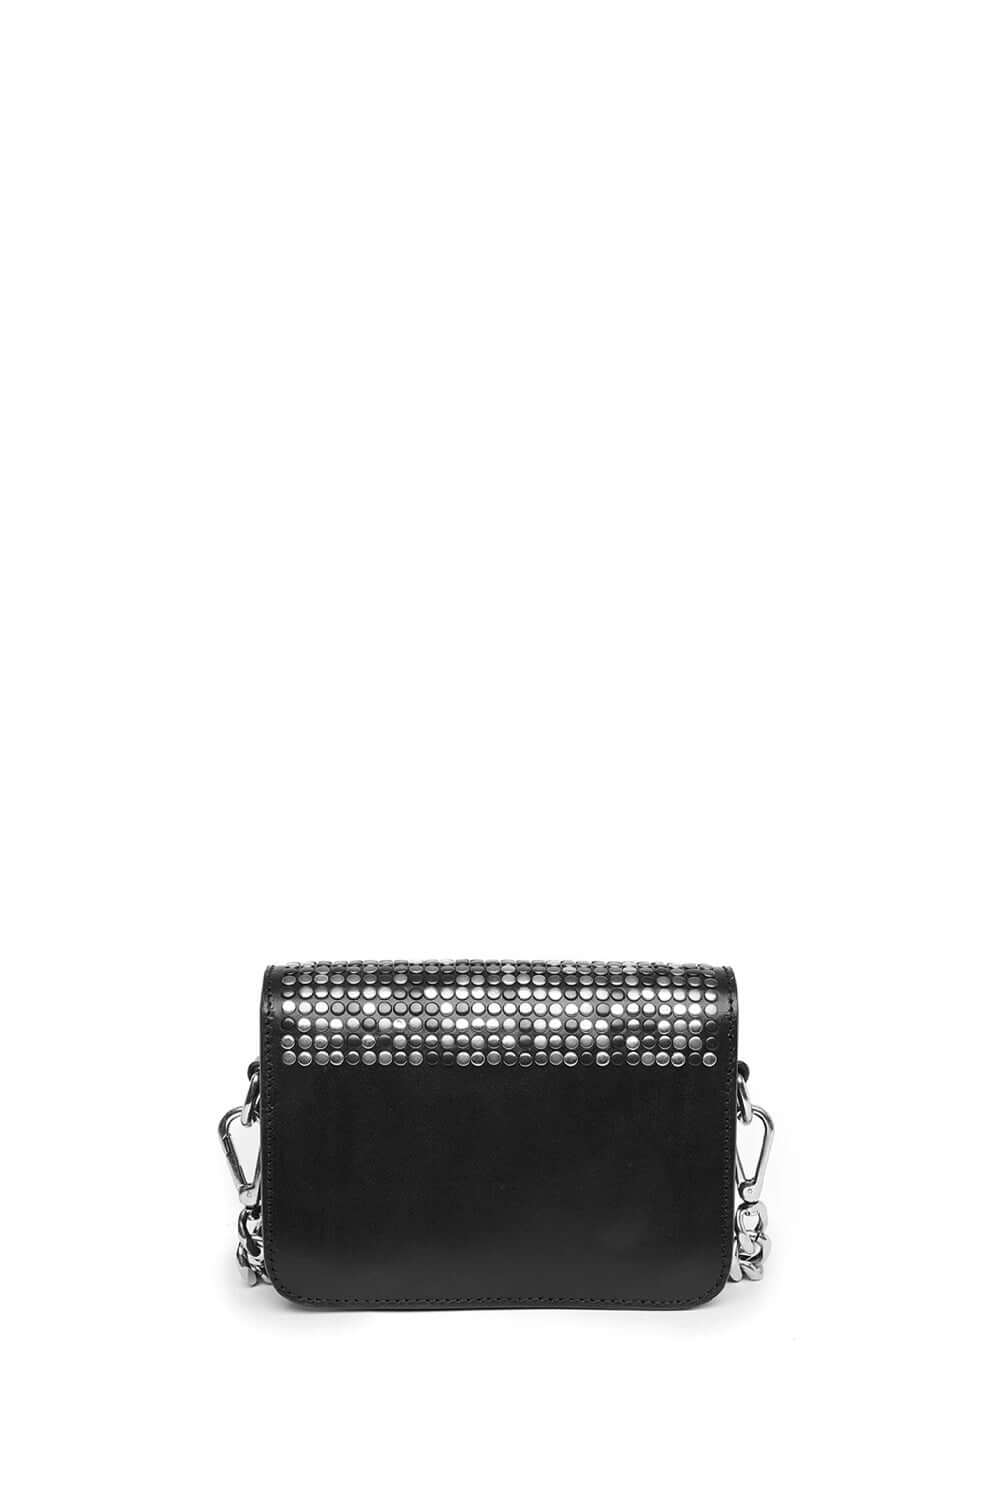 L.A. 10.000 MINI BAG Black leather mini bag. Front flap with snap button closure. Front silver colored metal logo detail. Studded outline on the front. One internal patch pocket. Leather lining. Shoulder leather strap and metal chain little strap. Made in